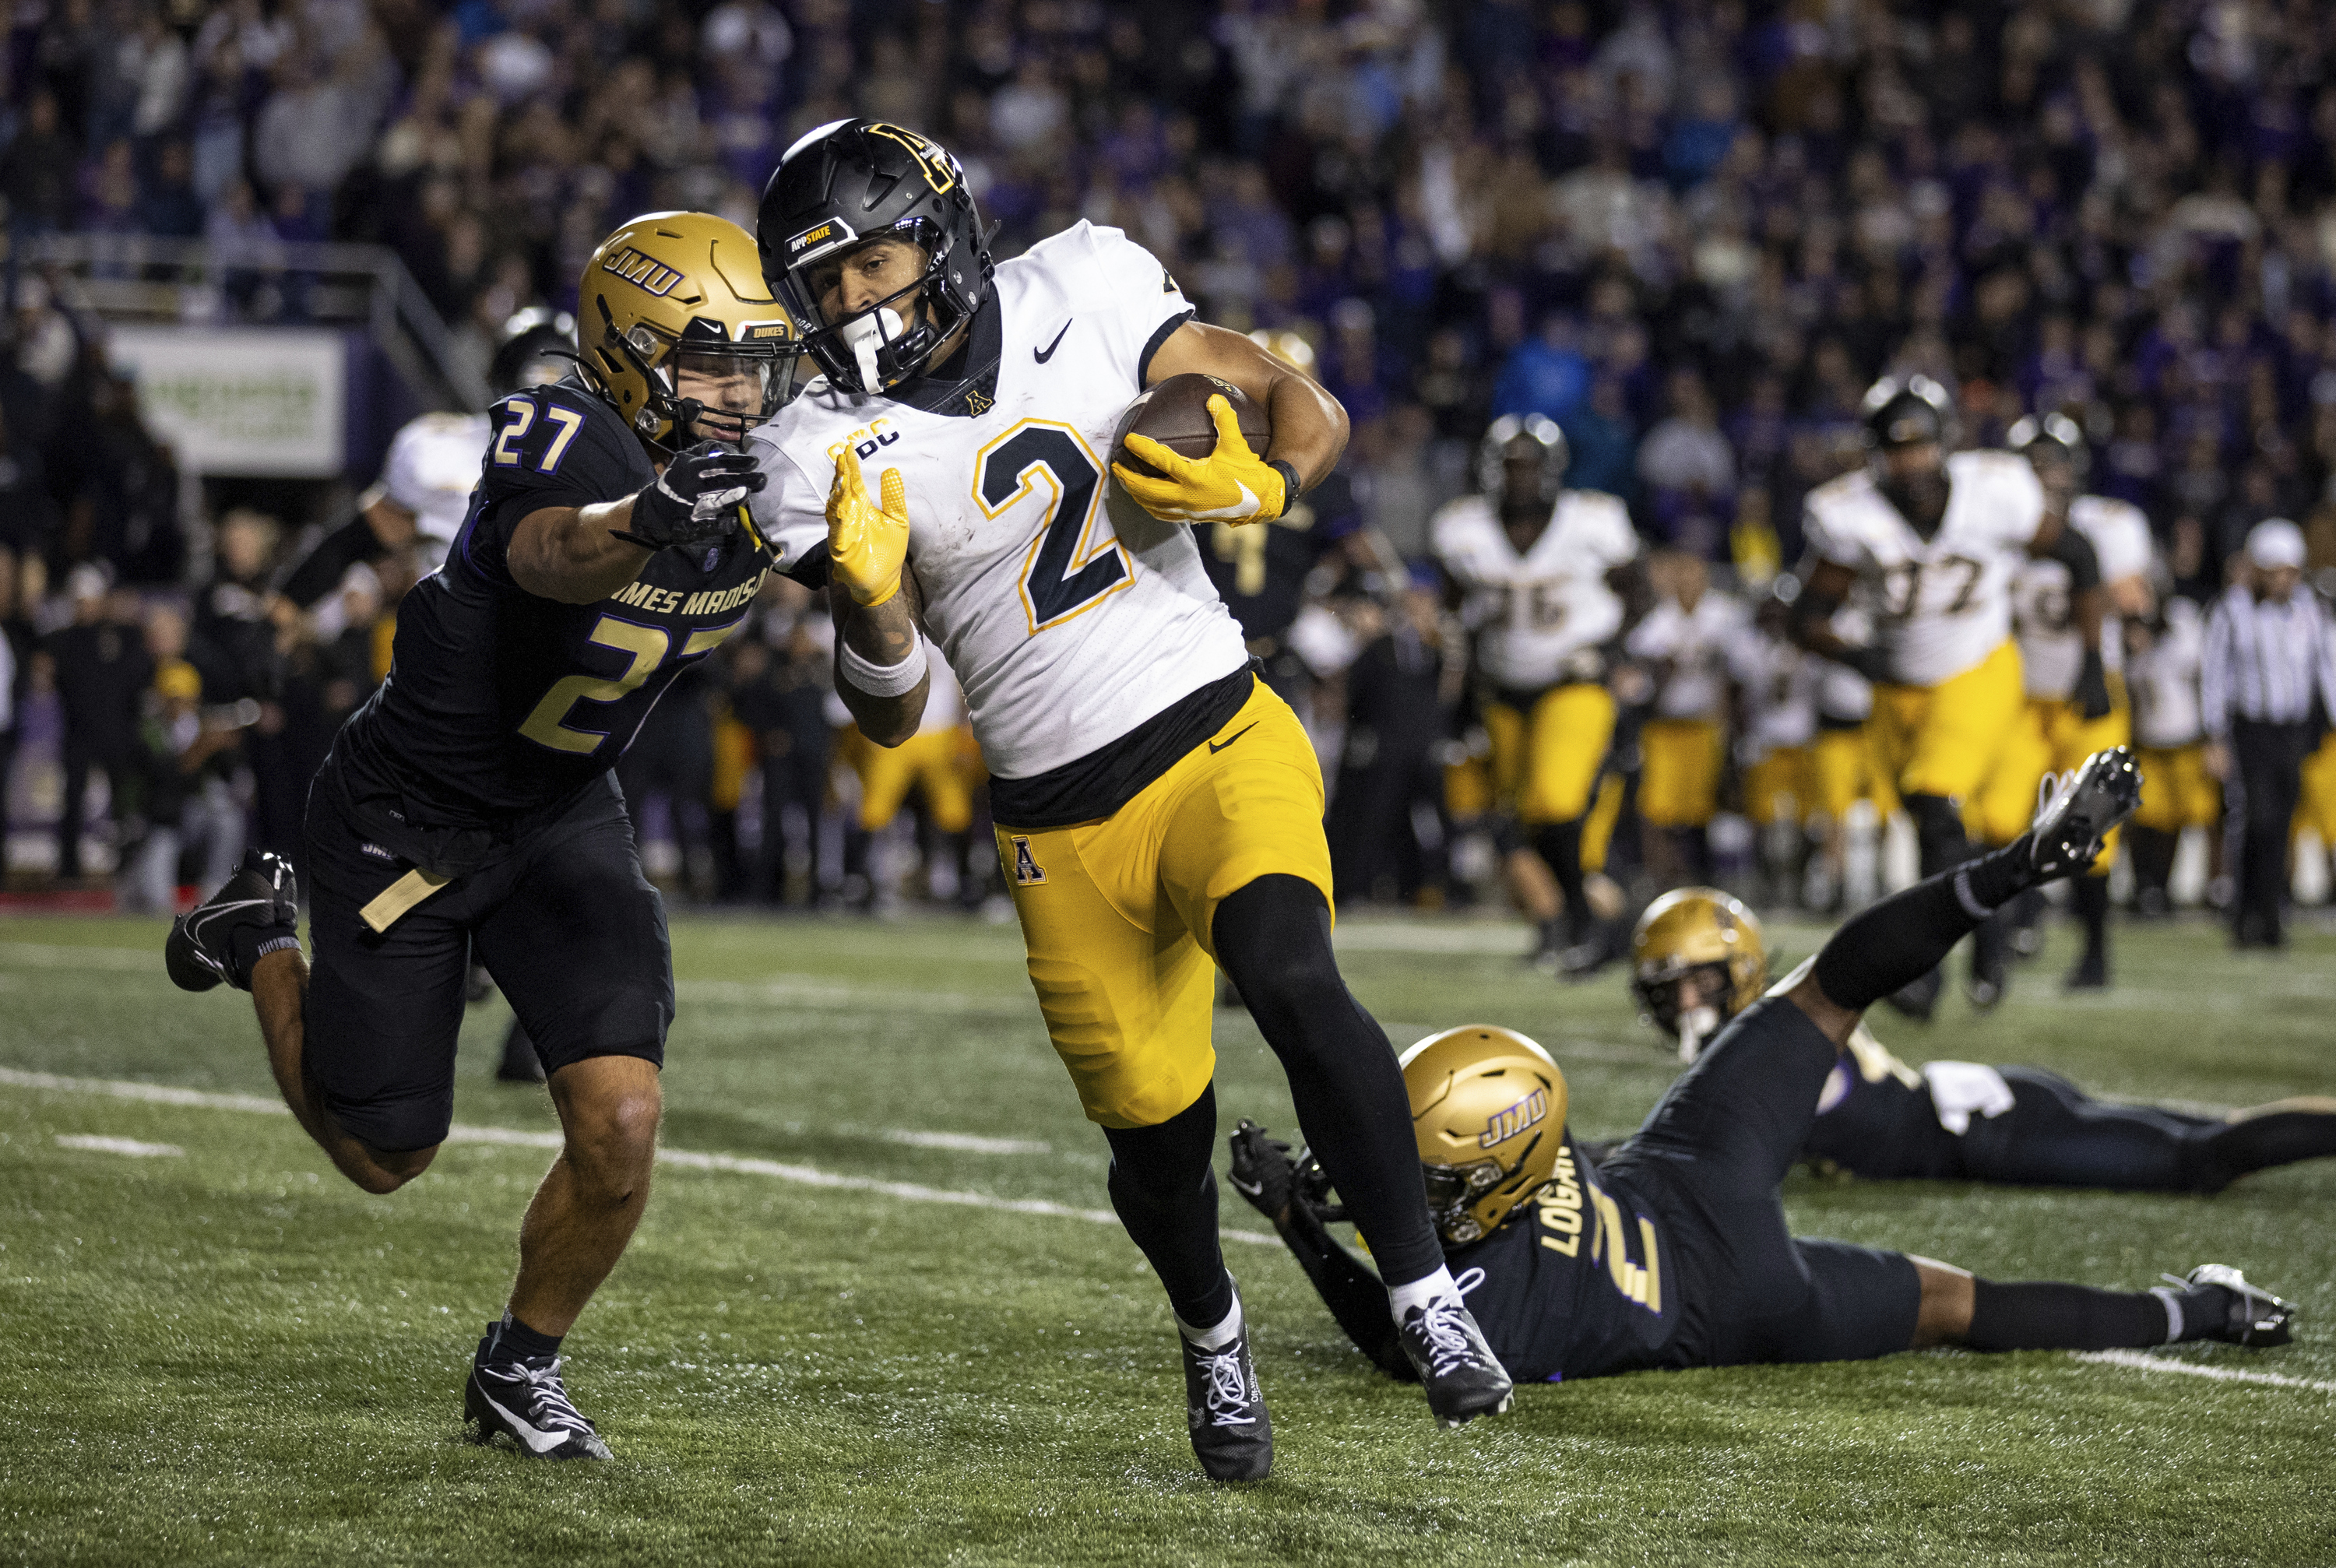 Appalachian State ends unbeaten run by No. 18 James Madison 26-23 in  overtime